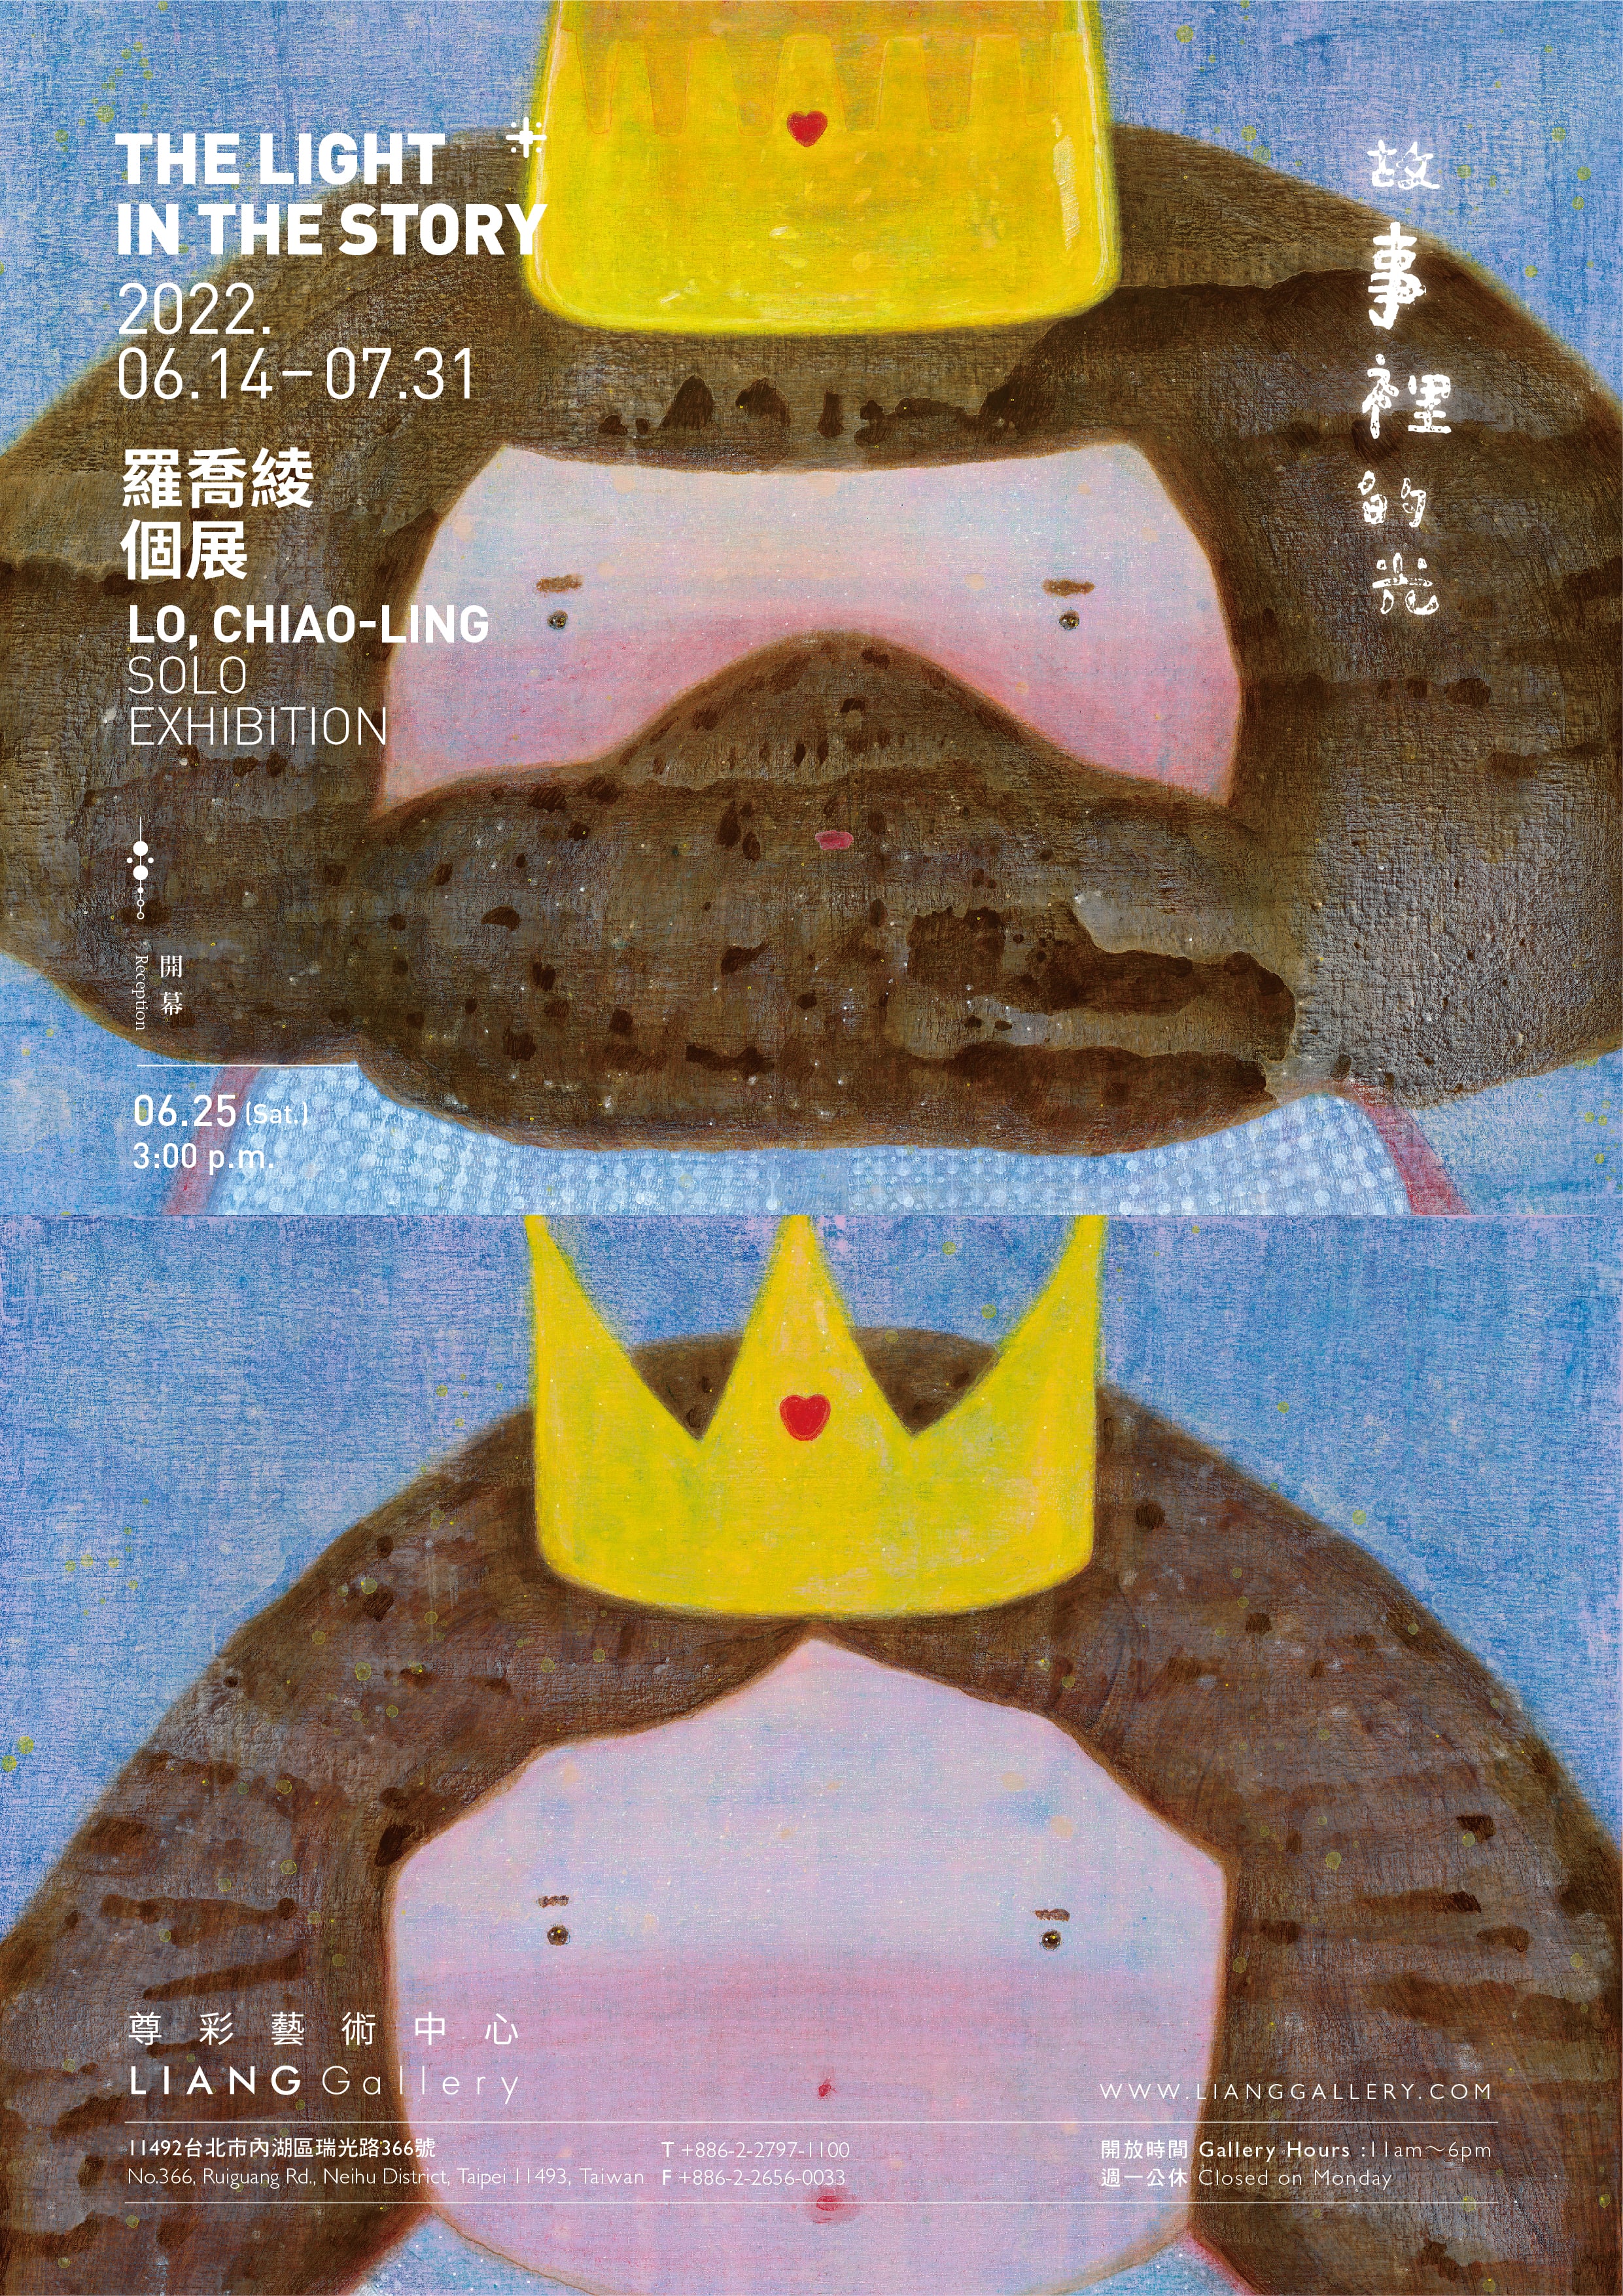 The Light in the Story – Lo Chiao-Ling Solo Exhibition